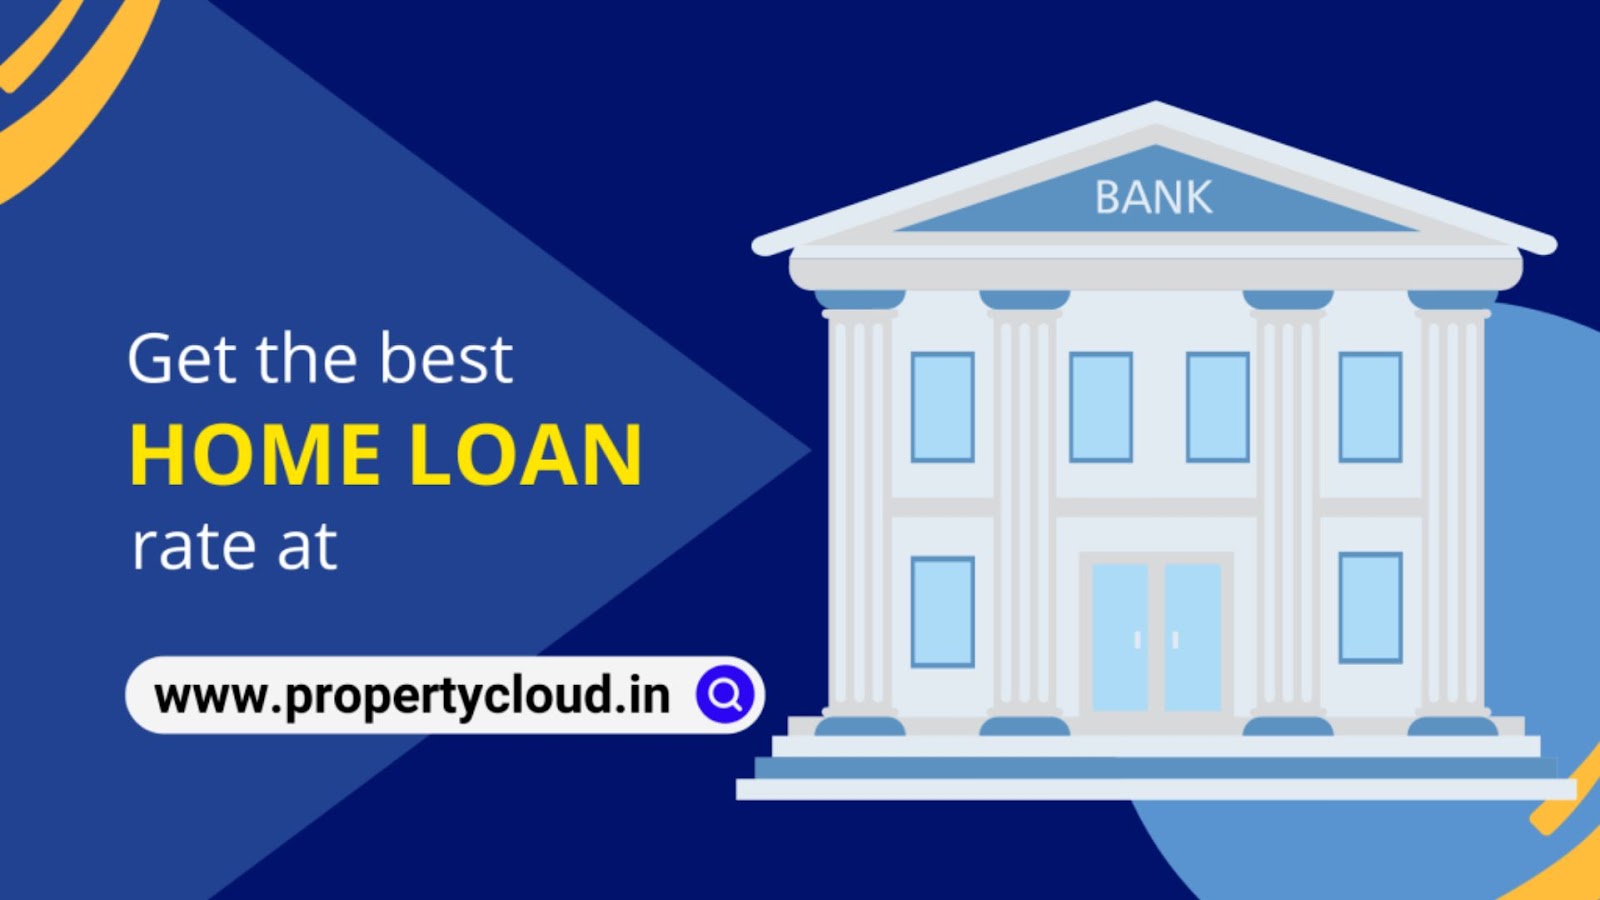 Contact a home loan expert for the best rates at PropertyCloud